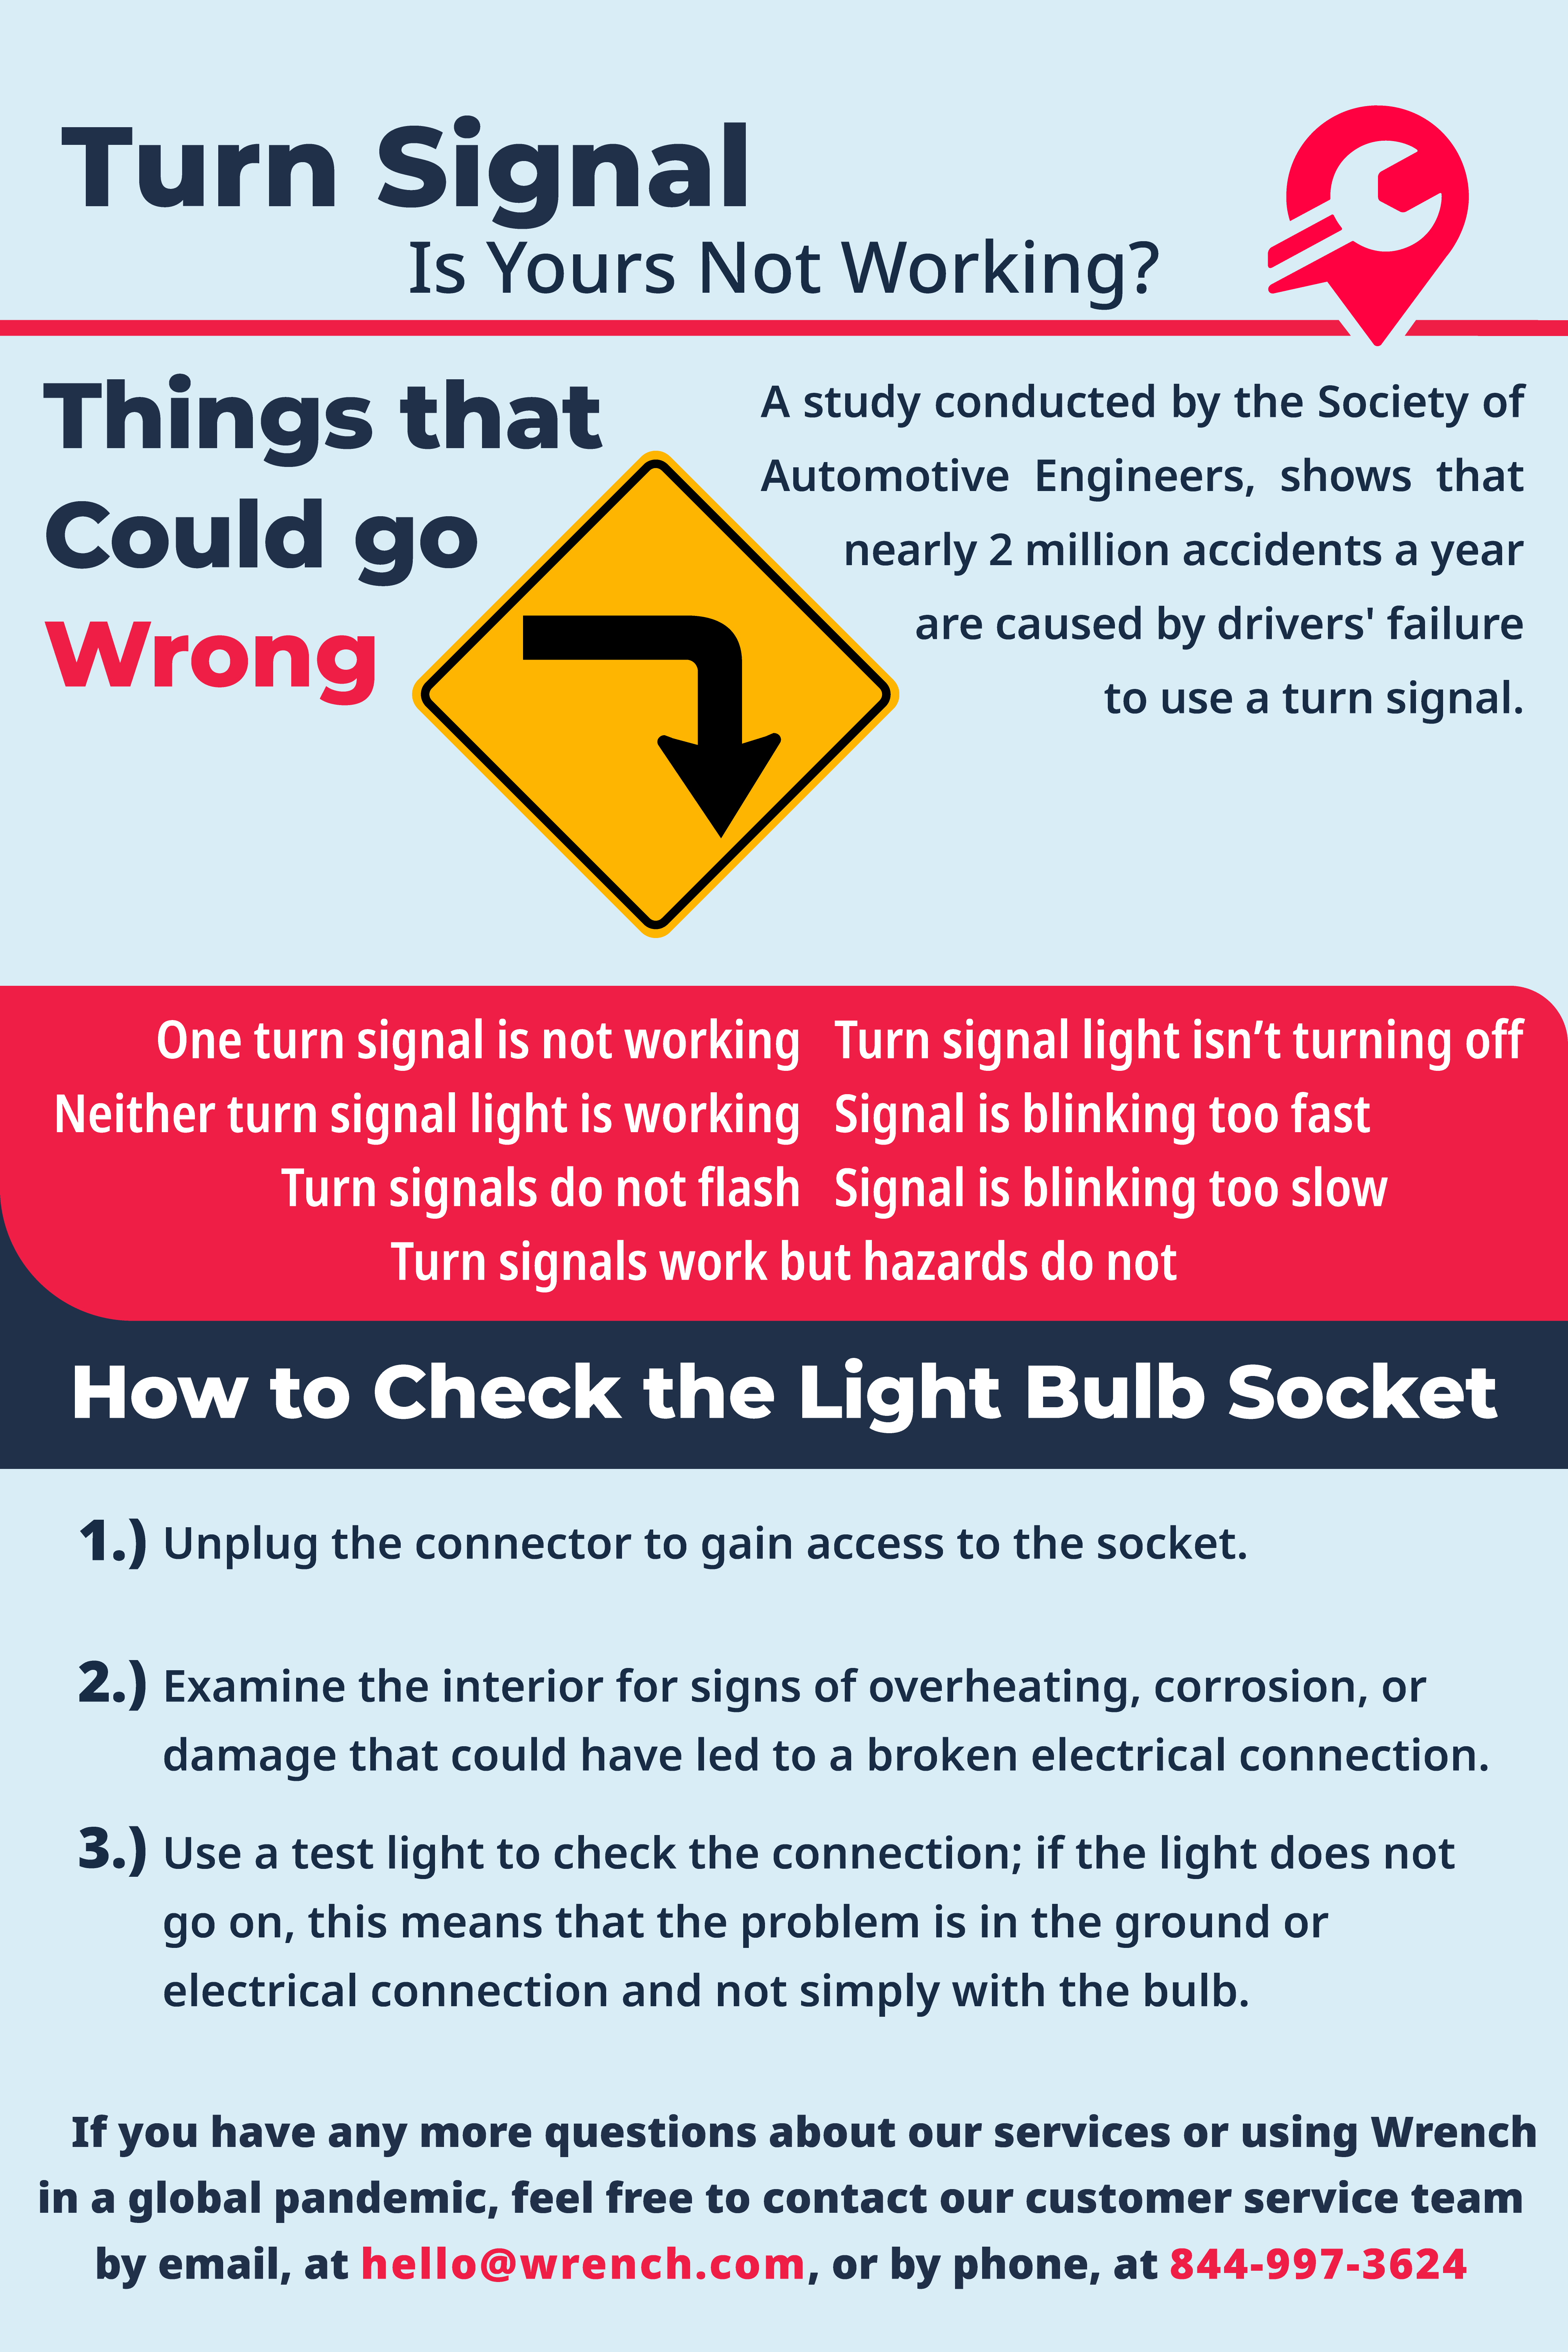 Reasons why your signal isn't working and how to check if it is. Don't know how? We can help by calling 844-997-3624